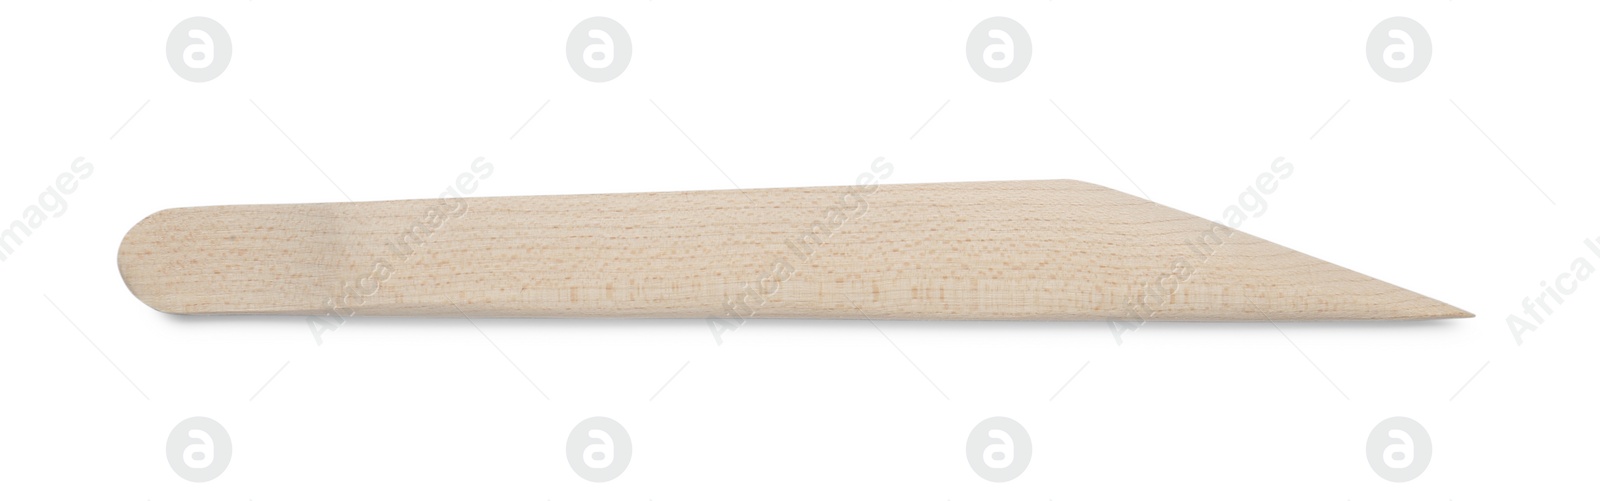 Photo of Wooden tool for clay modeling isolated on white